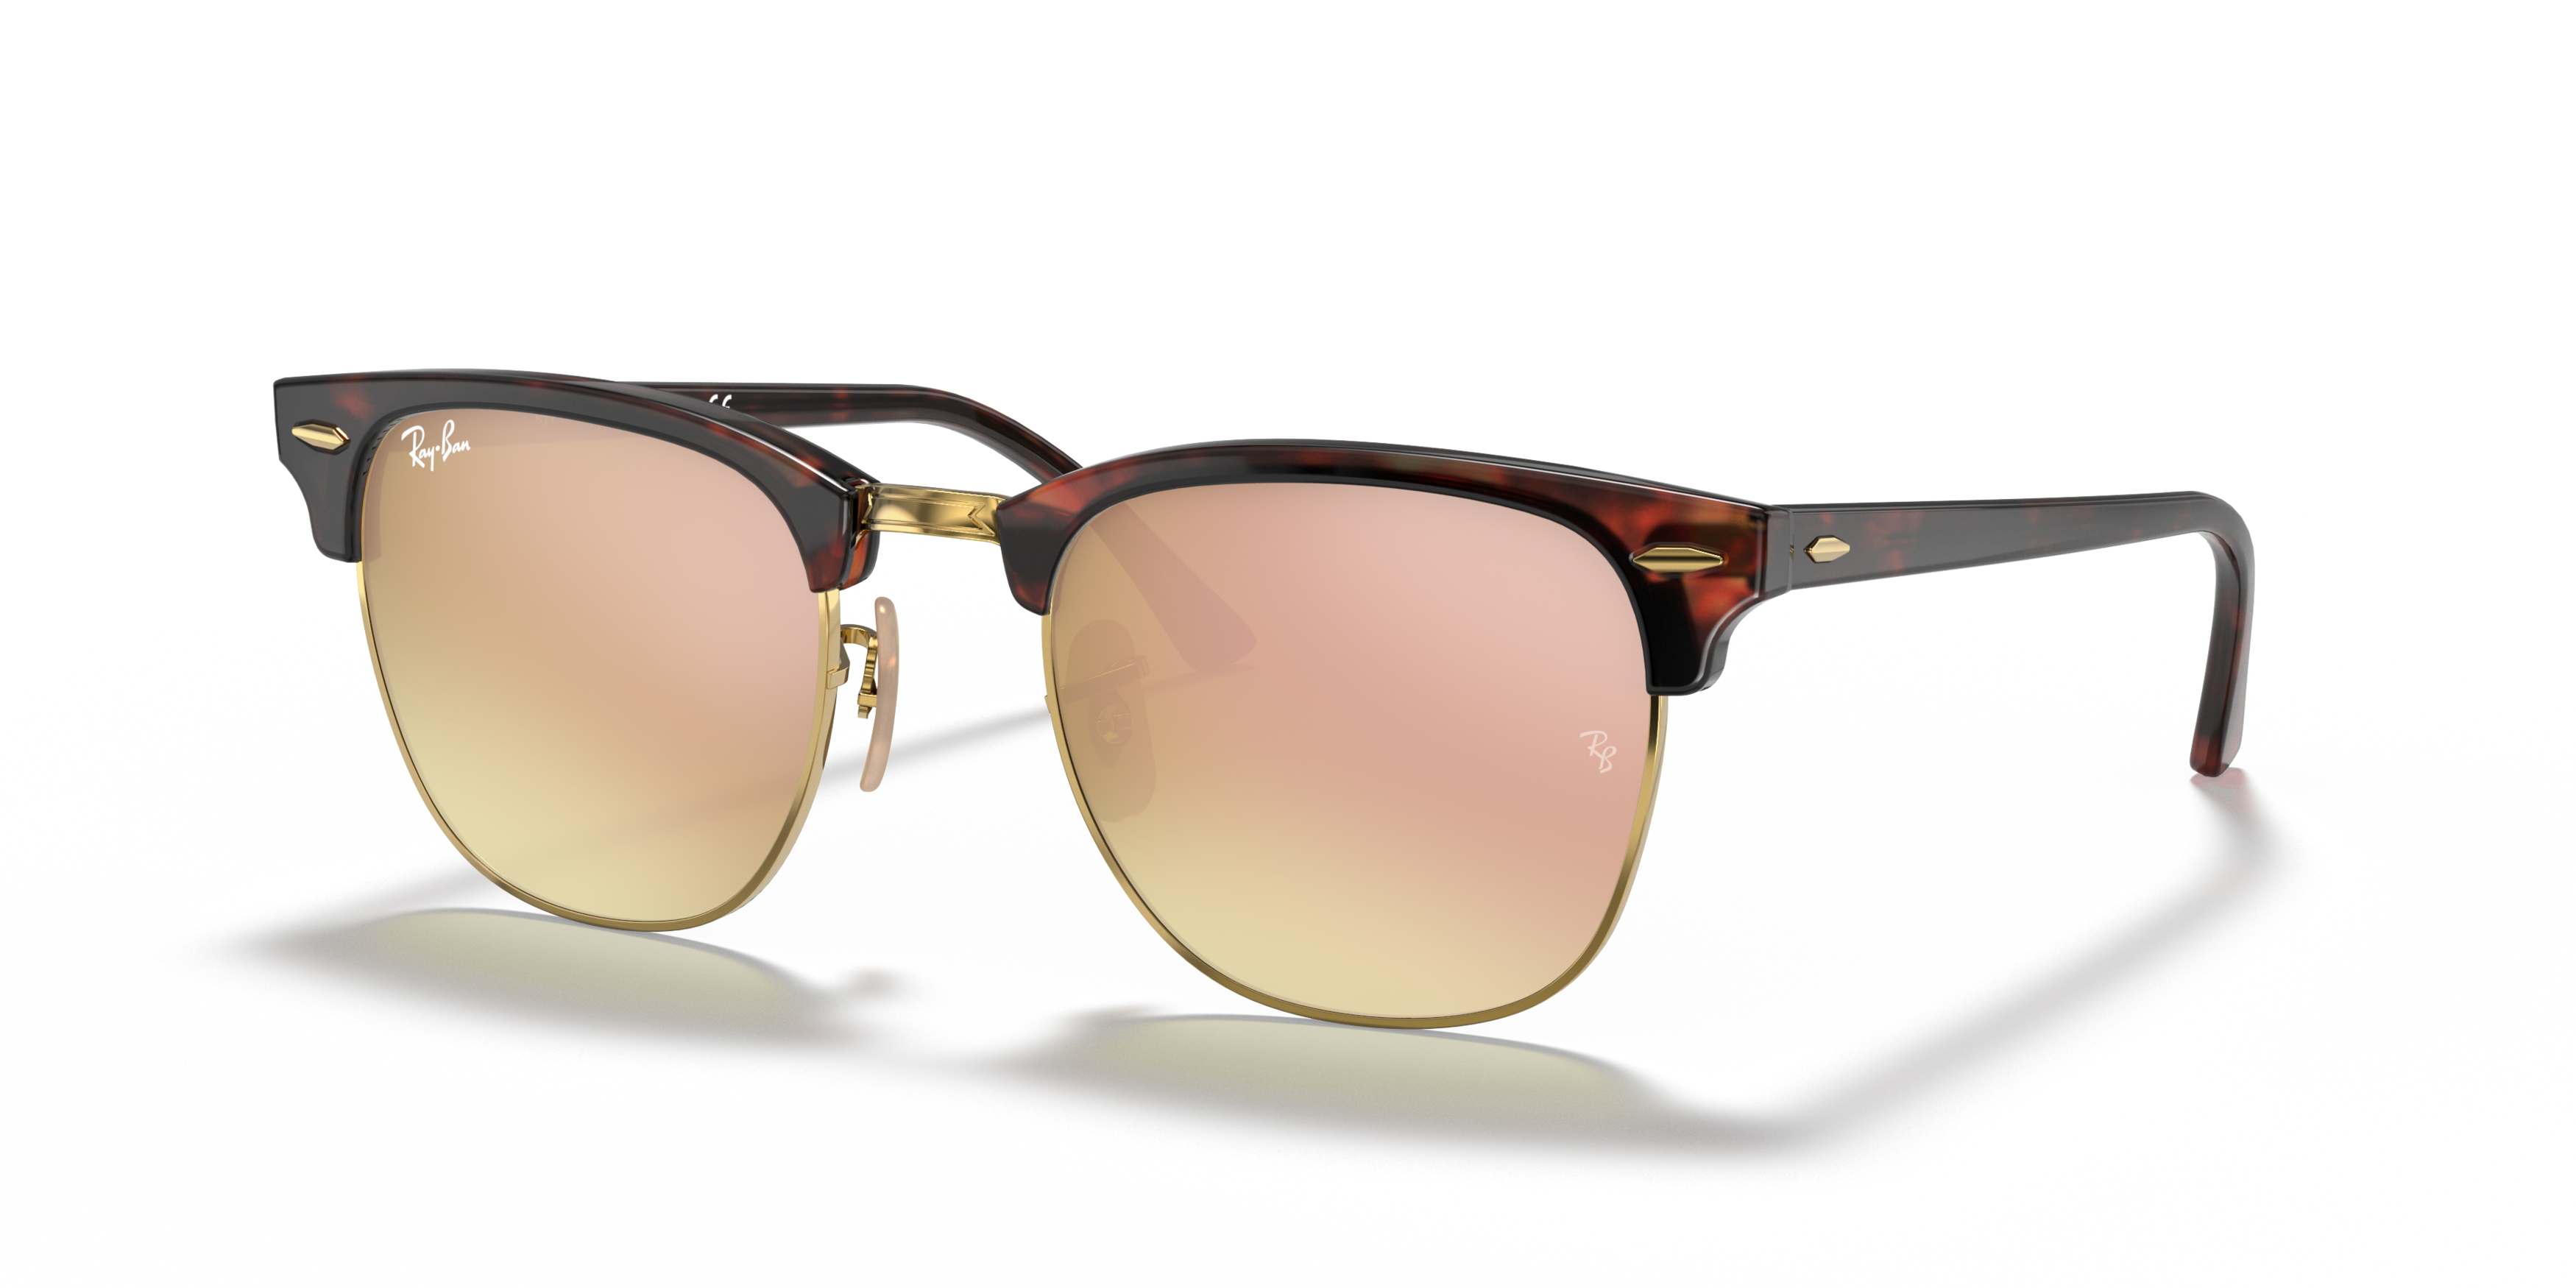 Angle_Left01 Ray-Ban Clubmaster RB 3016 Sunglasses Pink / Gold